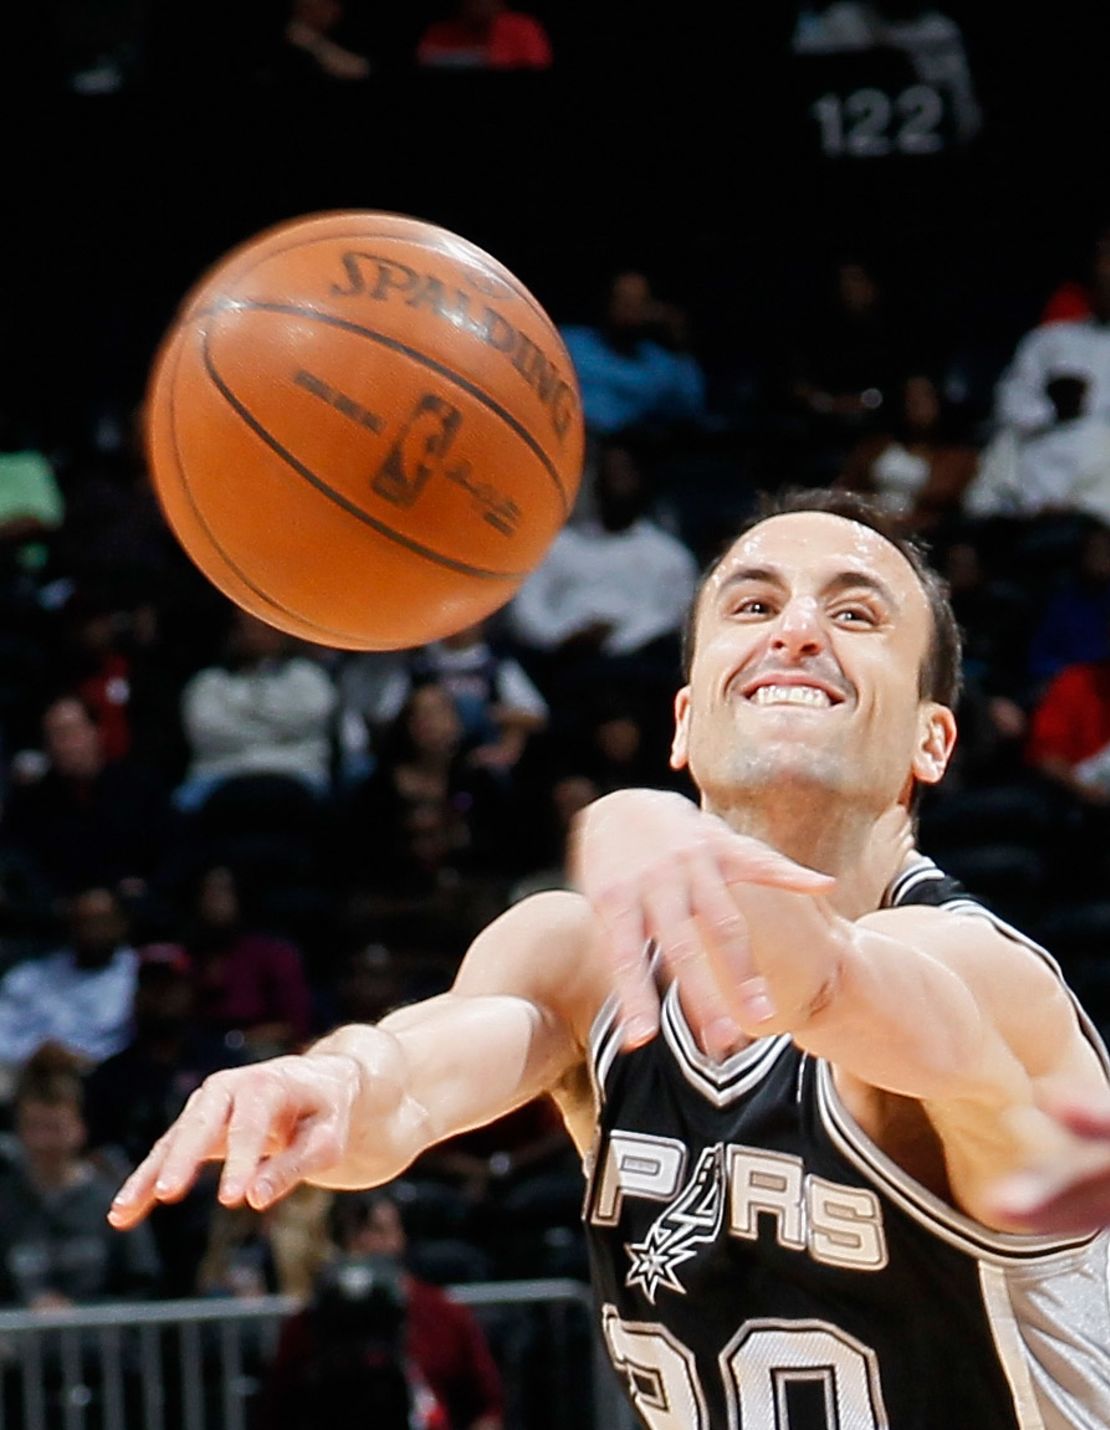 During the playoffs, Manu Ginobili has averaged 11.3 points, 4.5 assists and 3.3 rebounds.